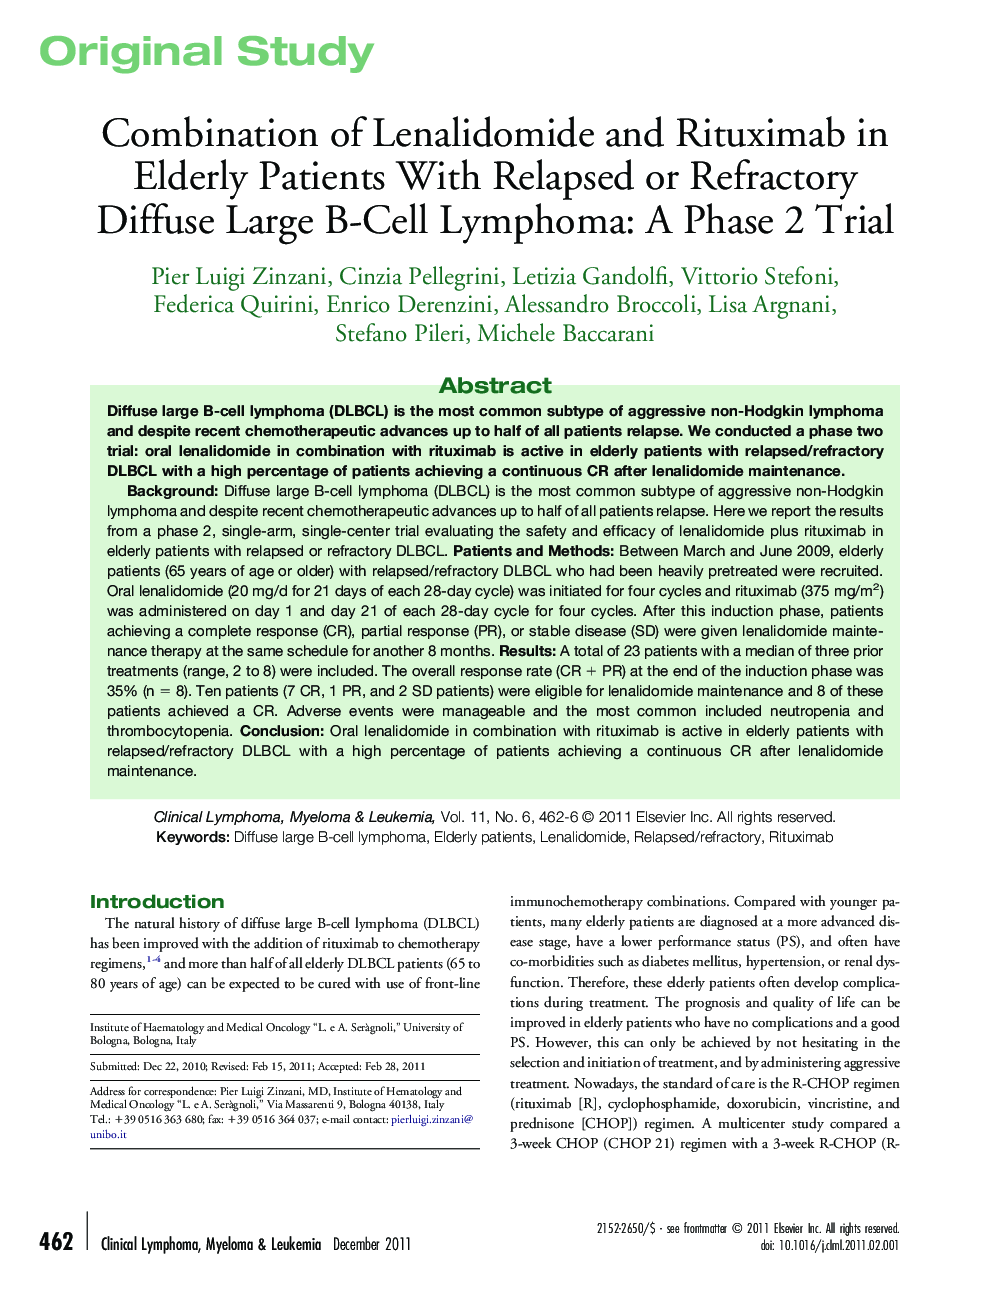 Combination of Lenalidomide and Rituximab in Elderly Patients With Relapsed or Refractory Diffuse Large B-Cell Lymphoma: A Phase 2 Trial